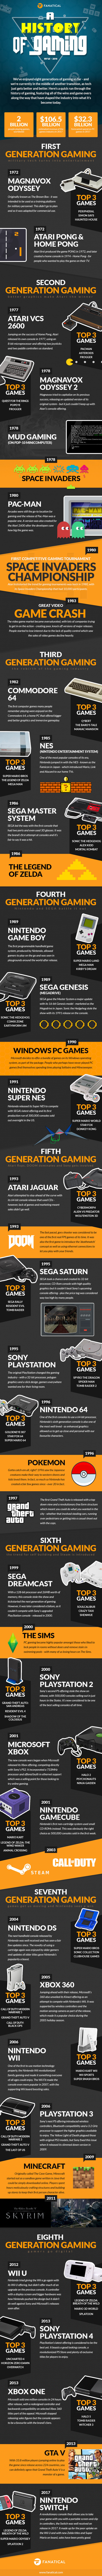 History Gaming Games Consoles Infographic